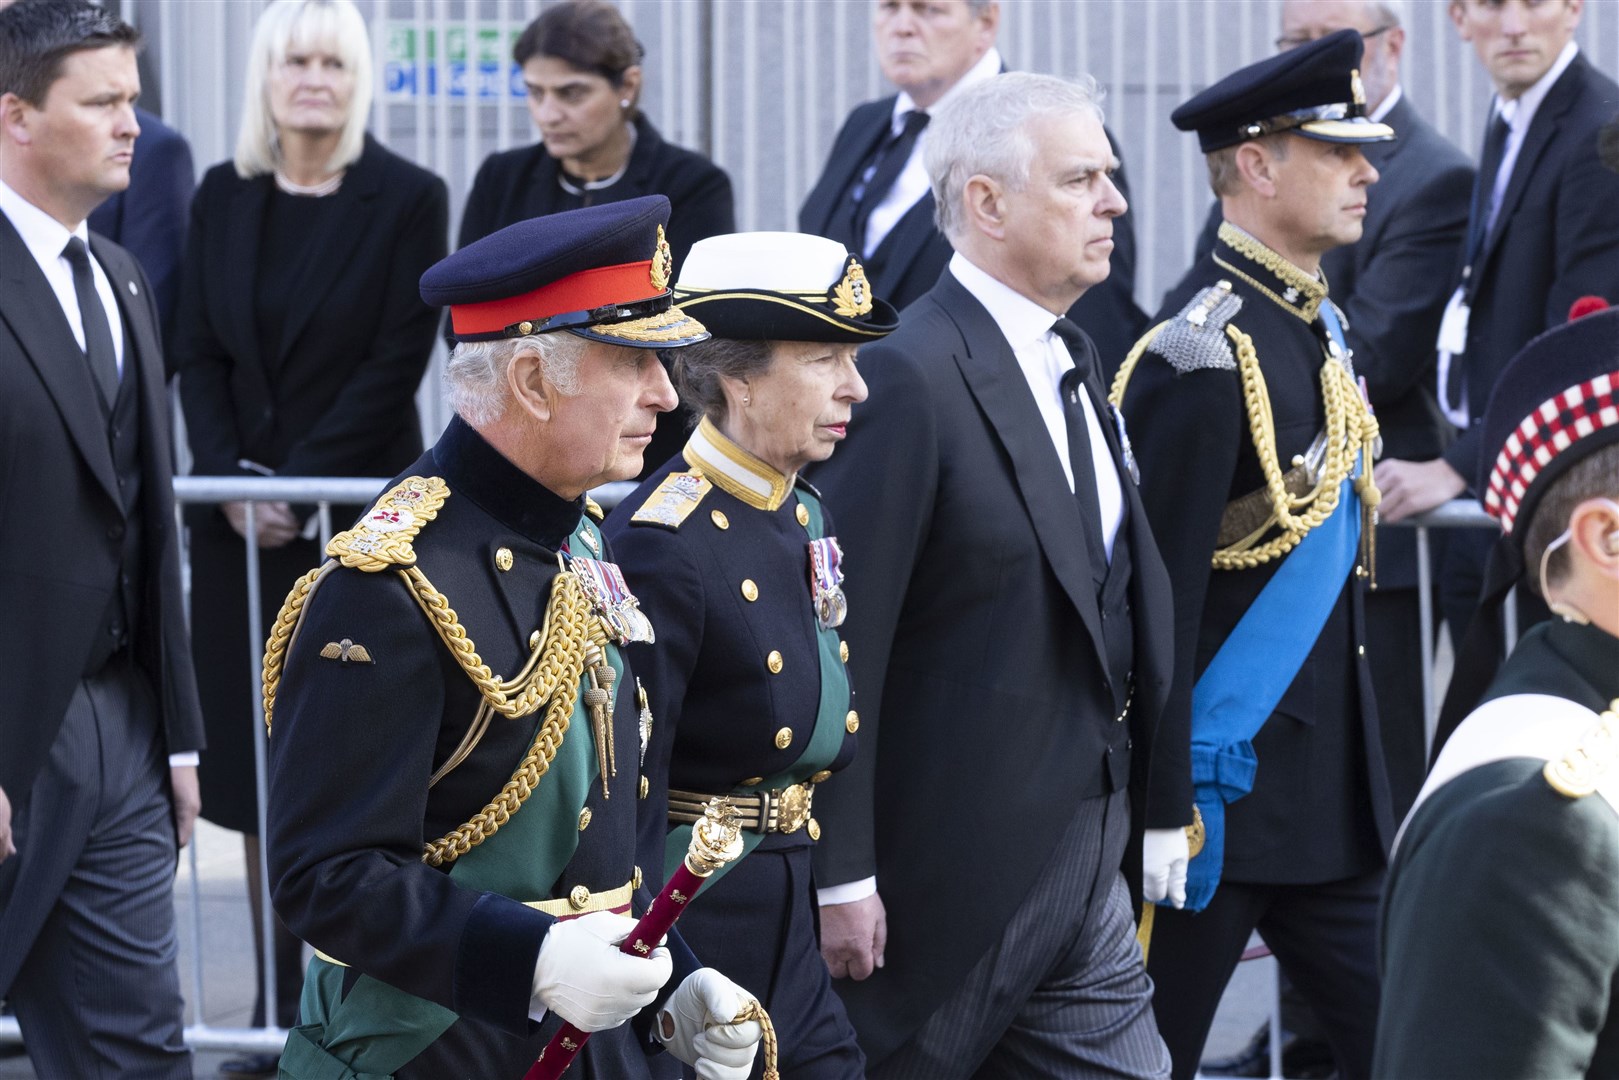 King Charles III, the Princess Royal, the Duke of York and the Earl of Wessex join the procession of Queen’s coffin in Edinburgh (Jamie Williamson/Daily Mail/PA)